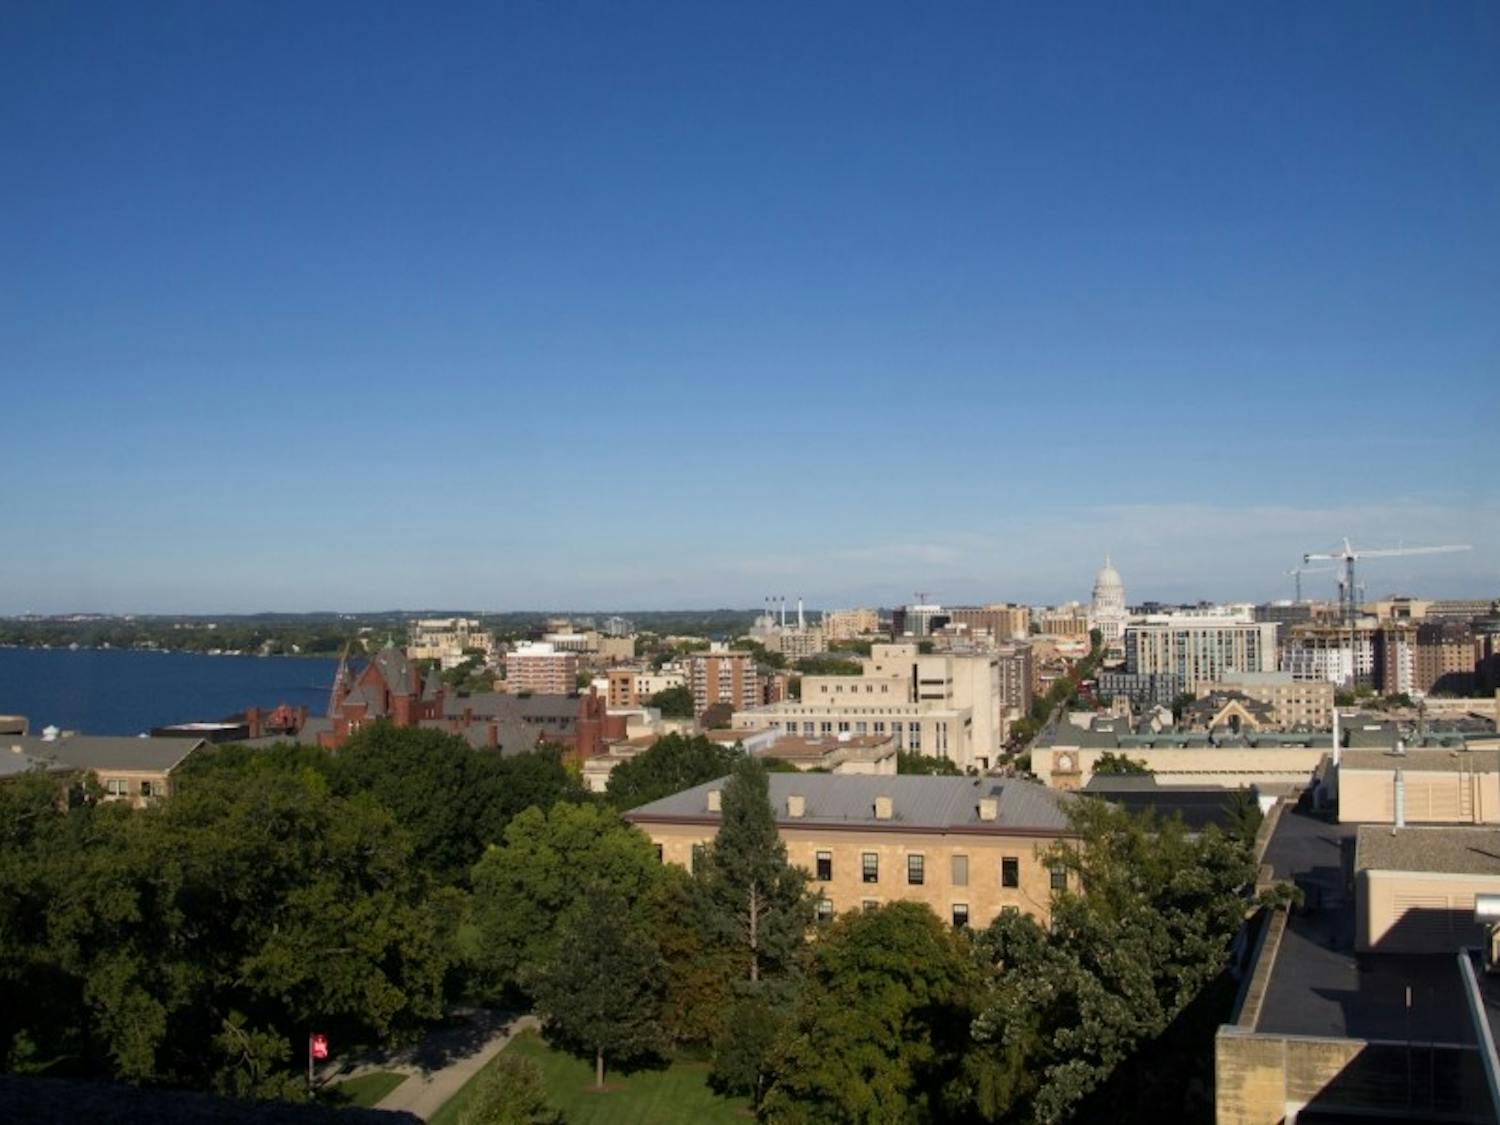 UW-Madison’s Campus plan recognized for excellence in analysis and planning. 